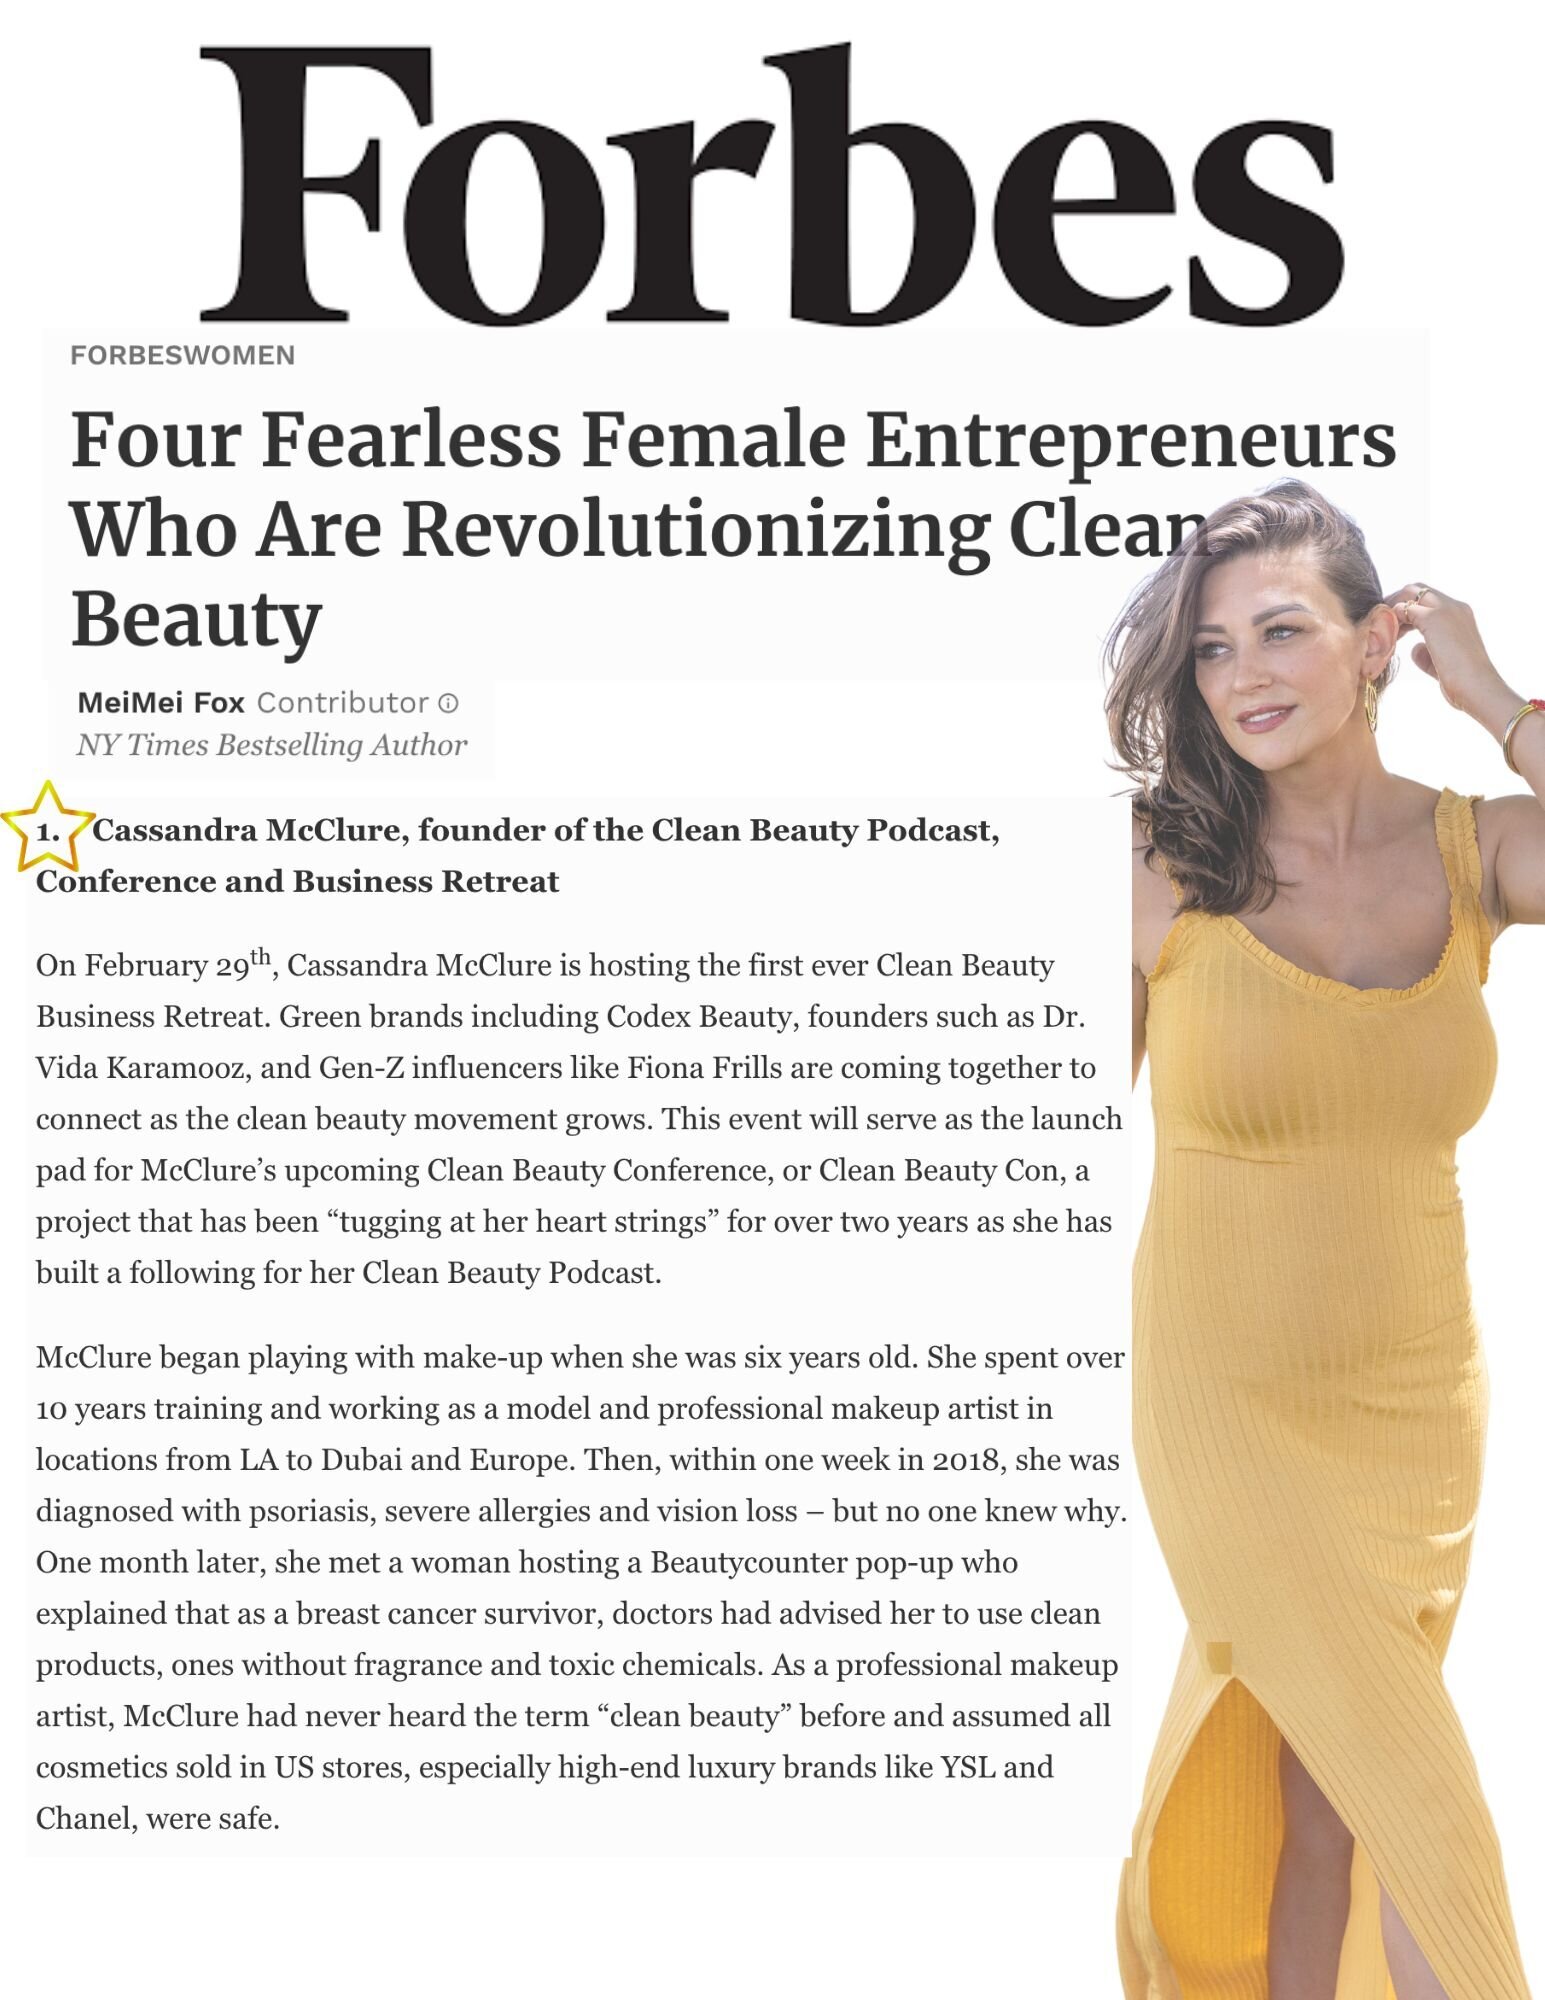 Forbes article featuring Cassandra McClure